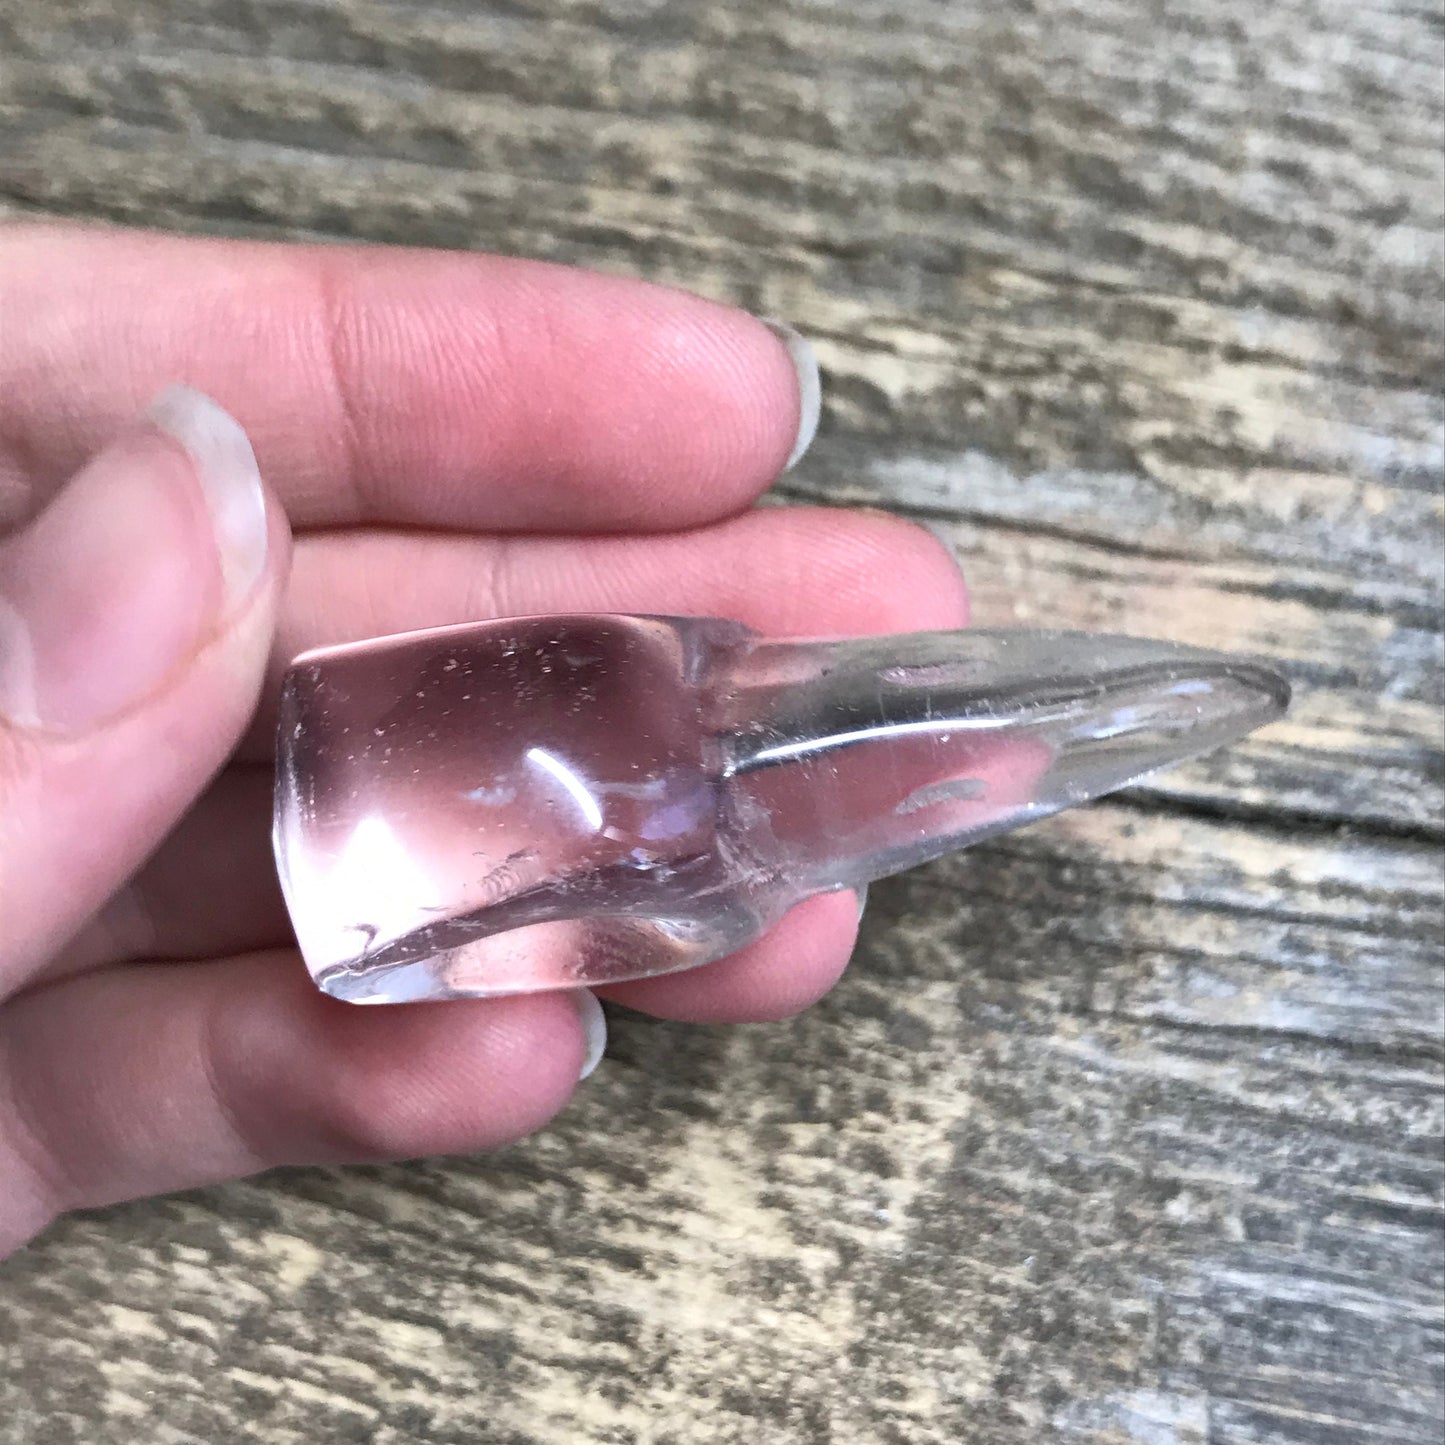 Carved Quartz Raven Skull (Approx. 1 3/4" - 2"), Supply for Crystal Grid, Home Decor or Halloween Crafts 0061